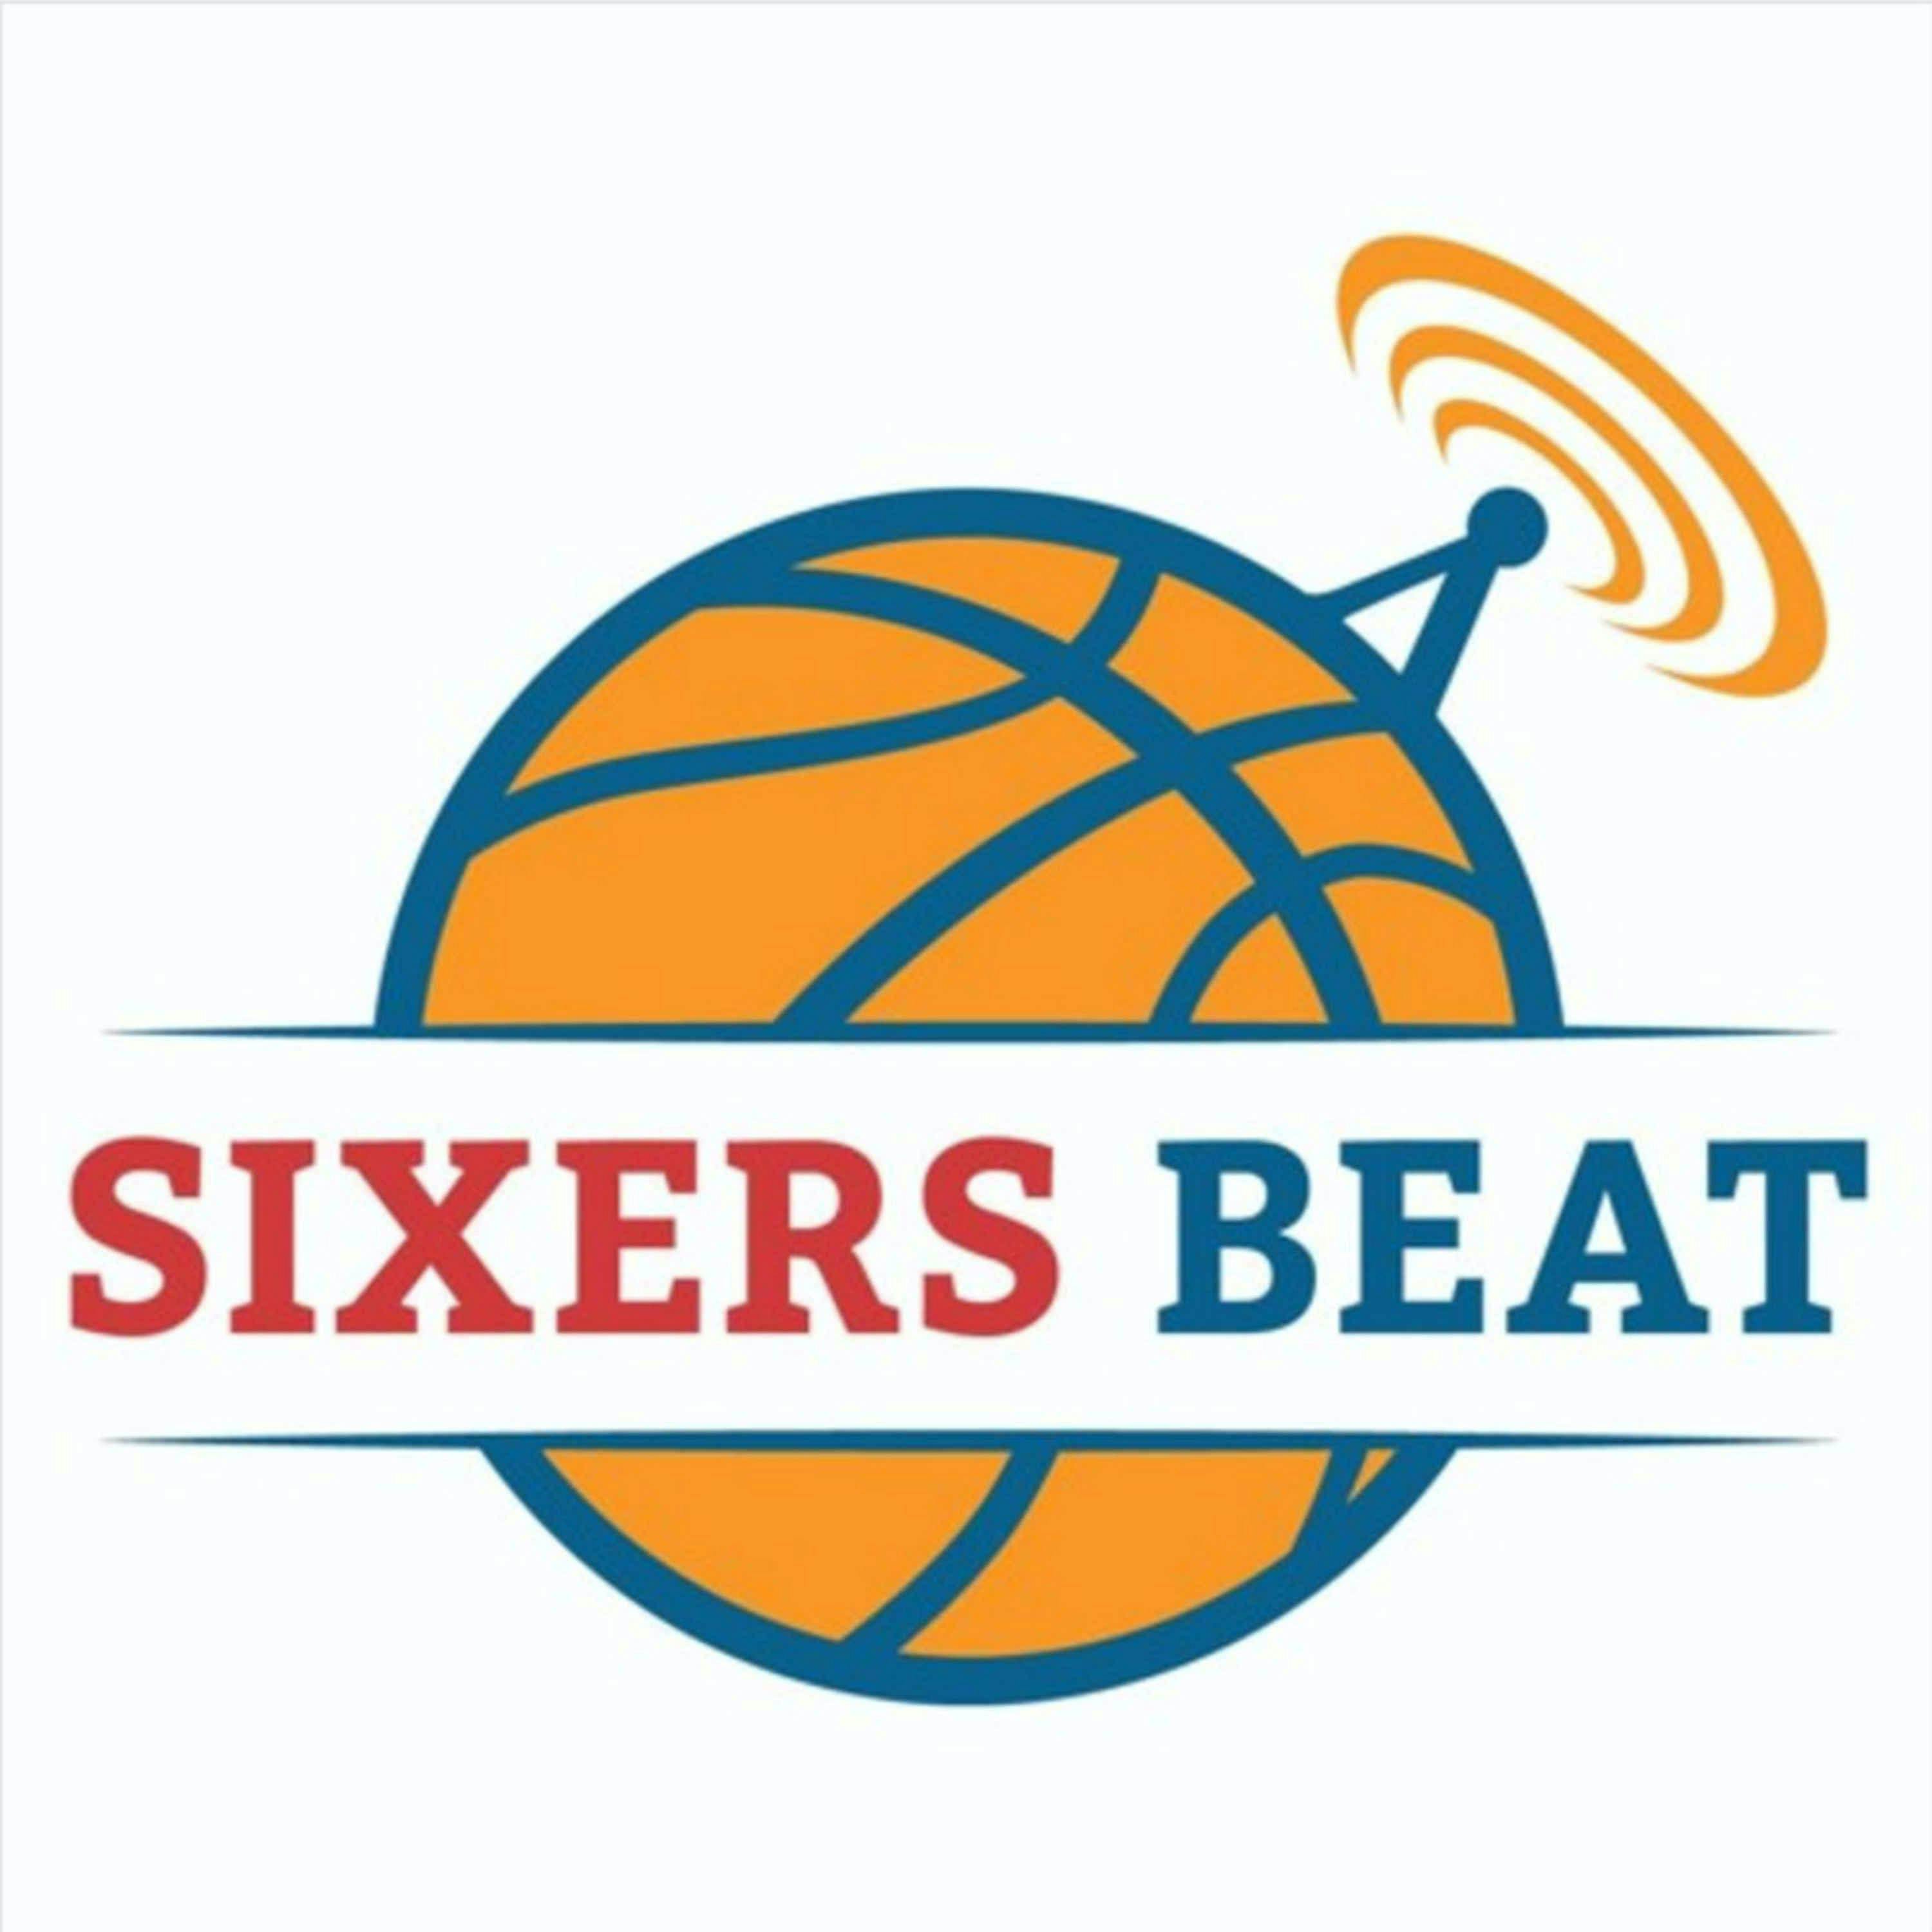 #148 - No LeBron. Where do the Sixers go from here?